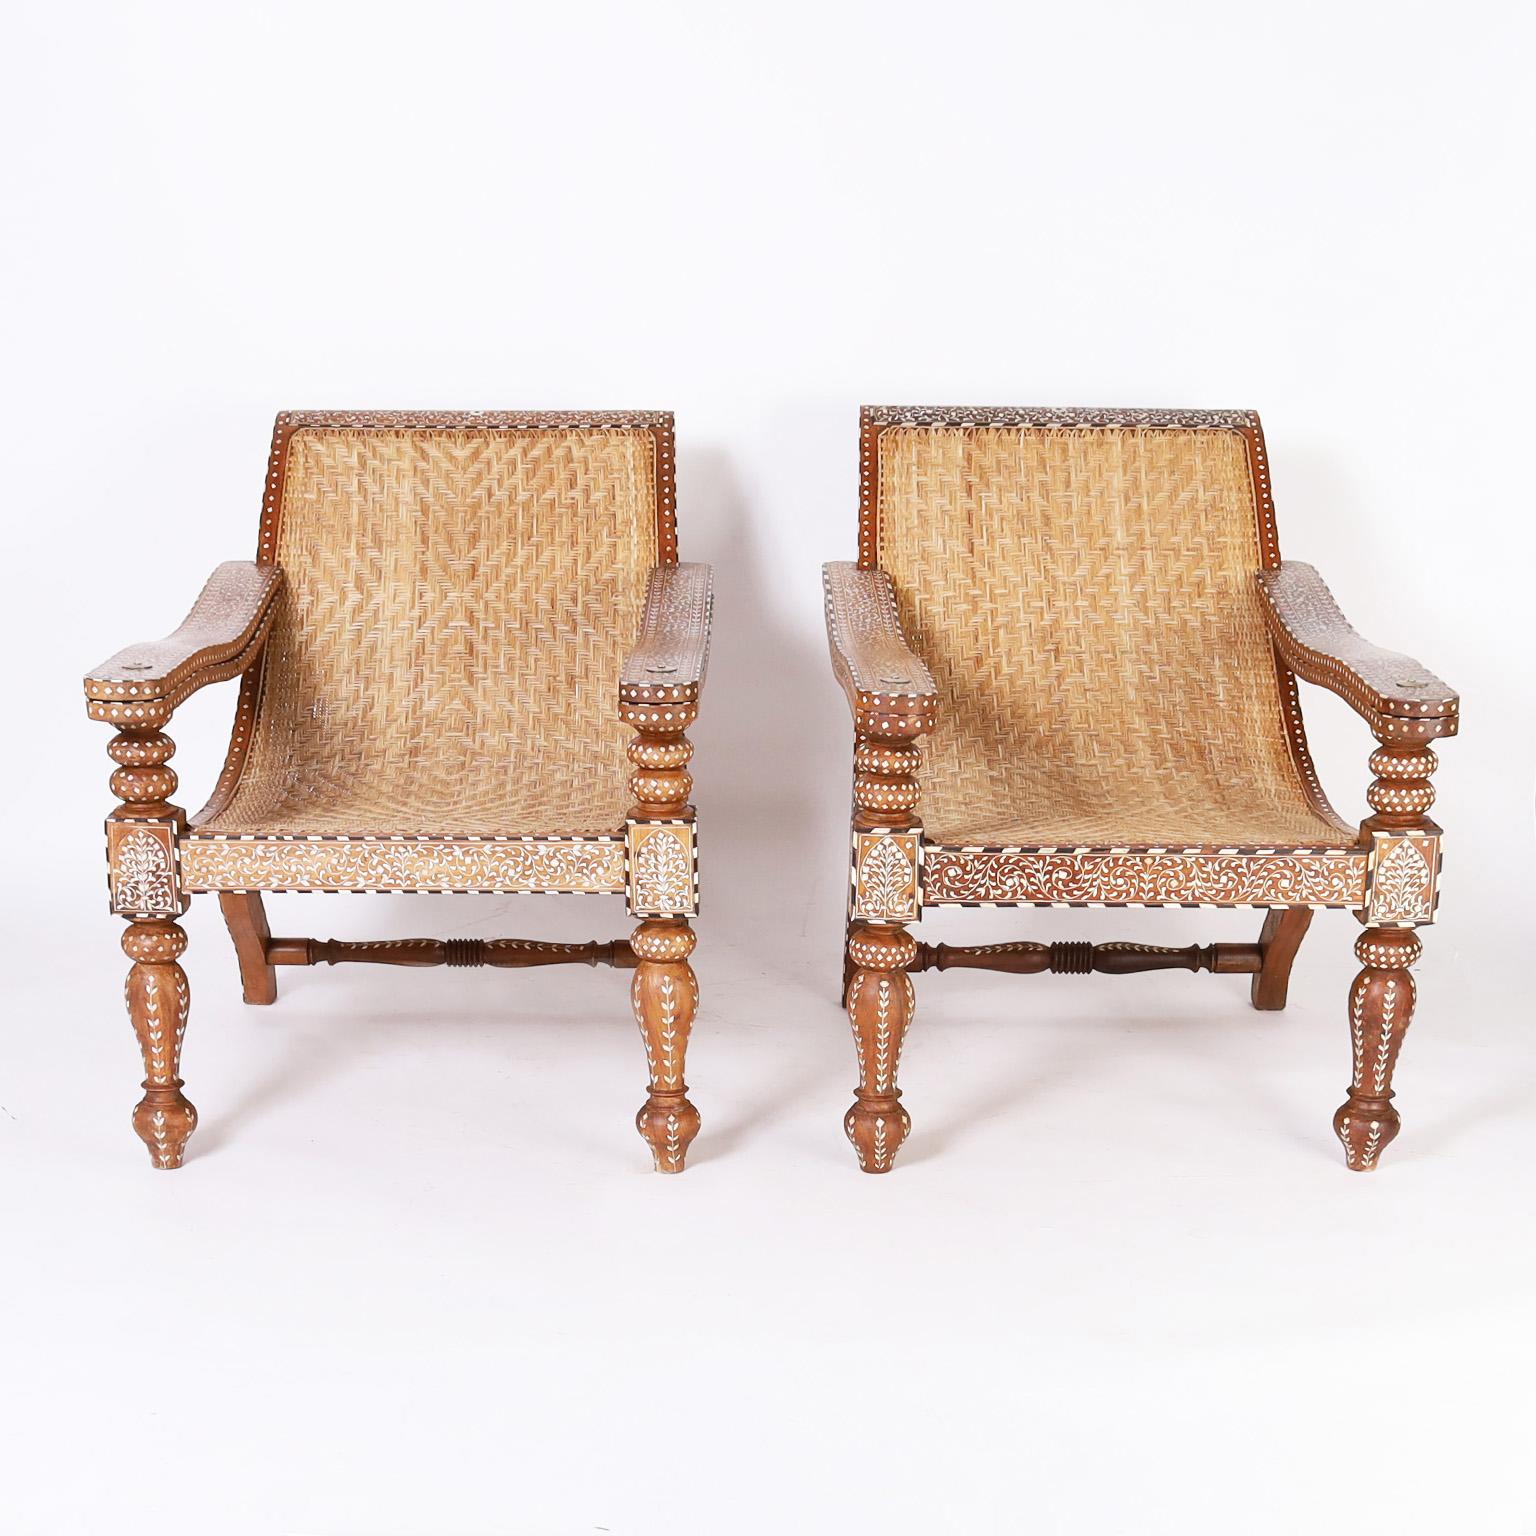 Vintage pair of Anglo Indian plantation chairs crafted in mahogany with iconic colonial form featuring caned seats in an unusual herringbone pattern. Elaborate bone and ebony inlays all around with swing out extensions and turned front legs.